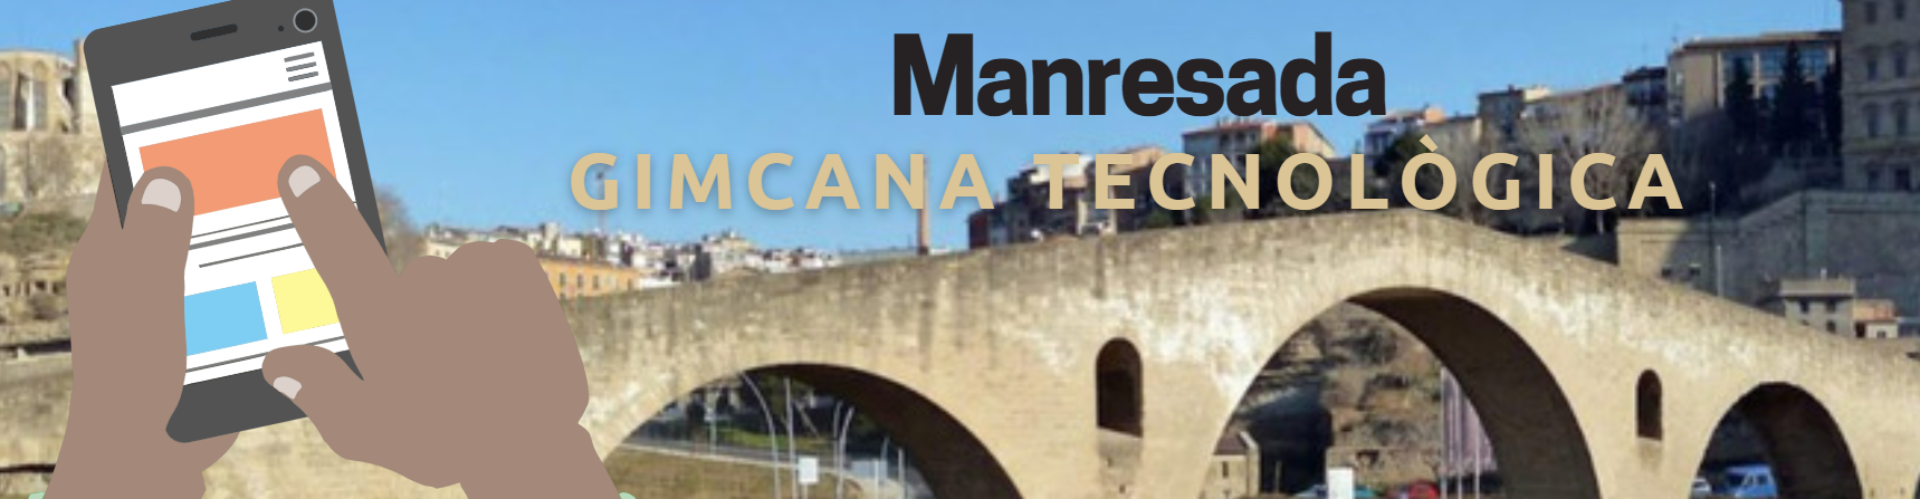 http://www.wmcproject.org/manresa/wp-content/uploads/2020/10/cropped-manresa-2021-3.png